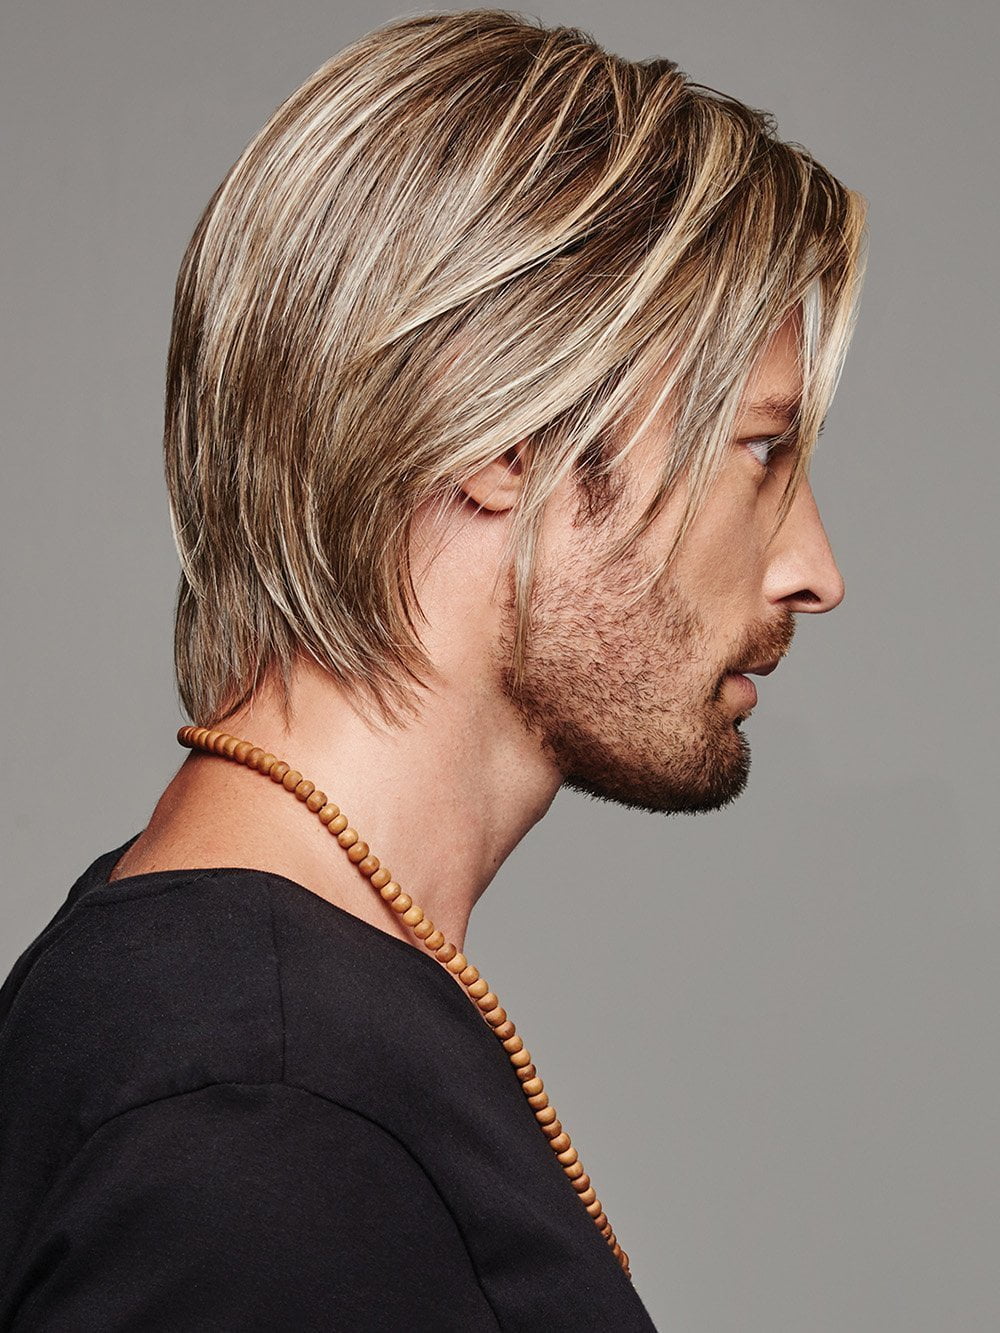 More length equals more options to achieve the perfect look